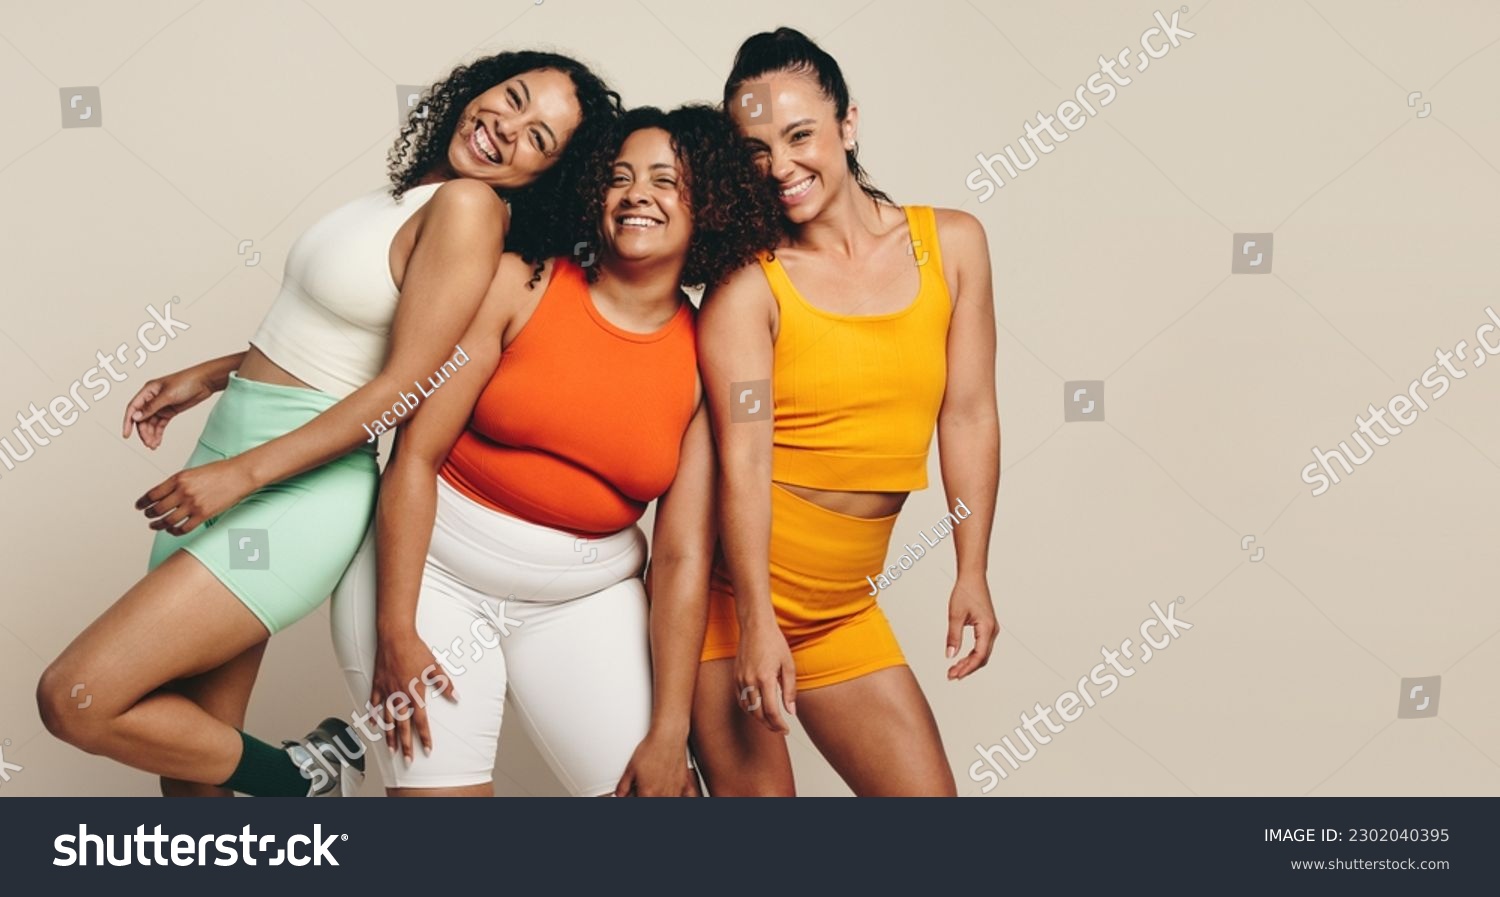 Female athletes smiling at the camera as they stand together in a studio, wearing fitness clothing. Group of young sports women expressing their love for sport, exercise and a health lifestyle. #2302040395